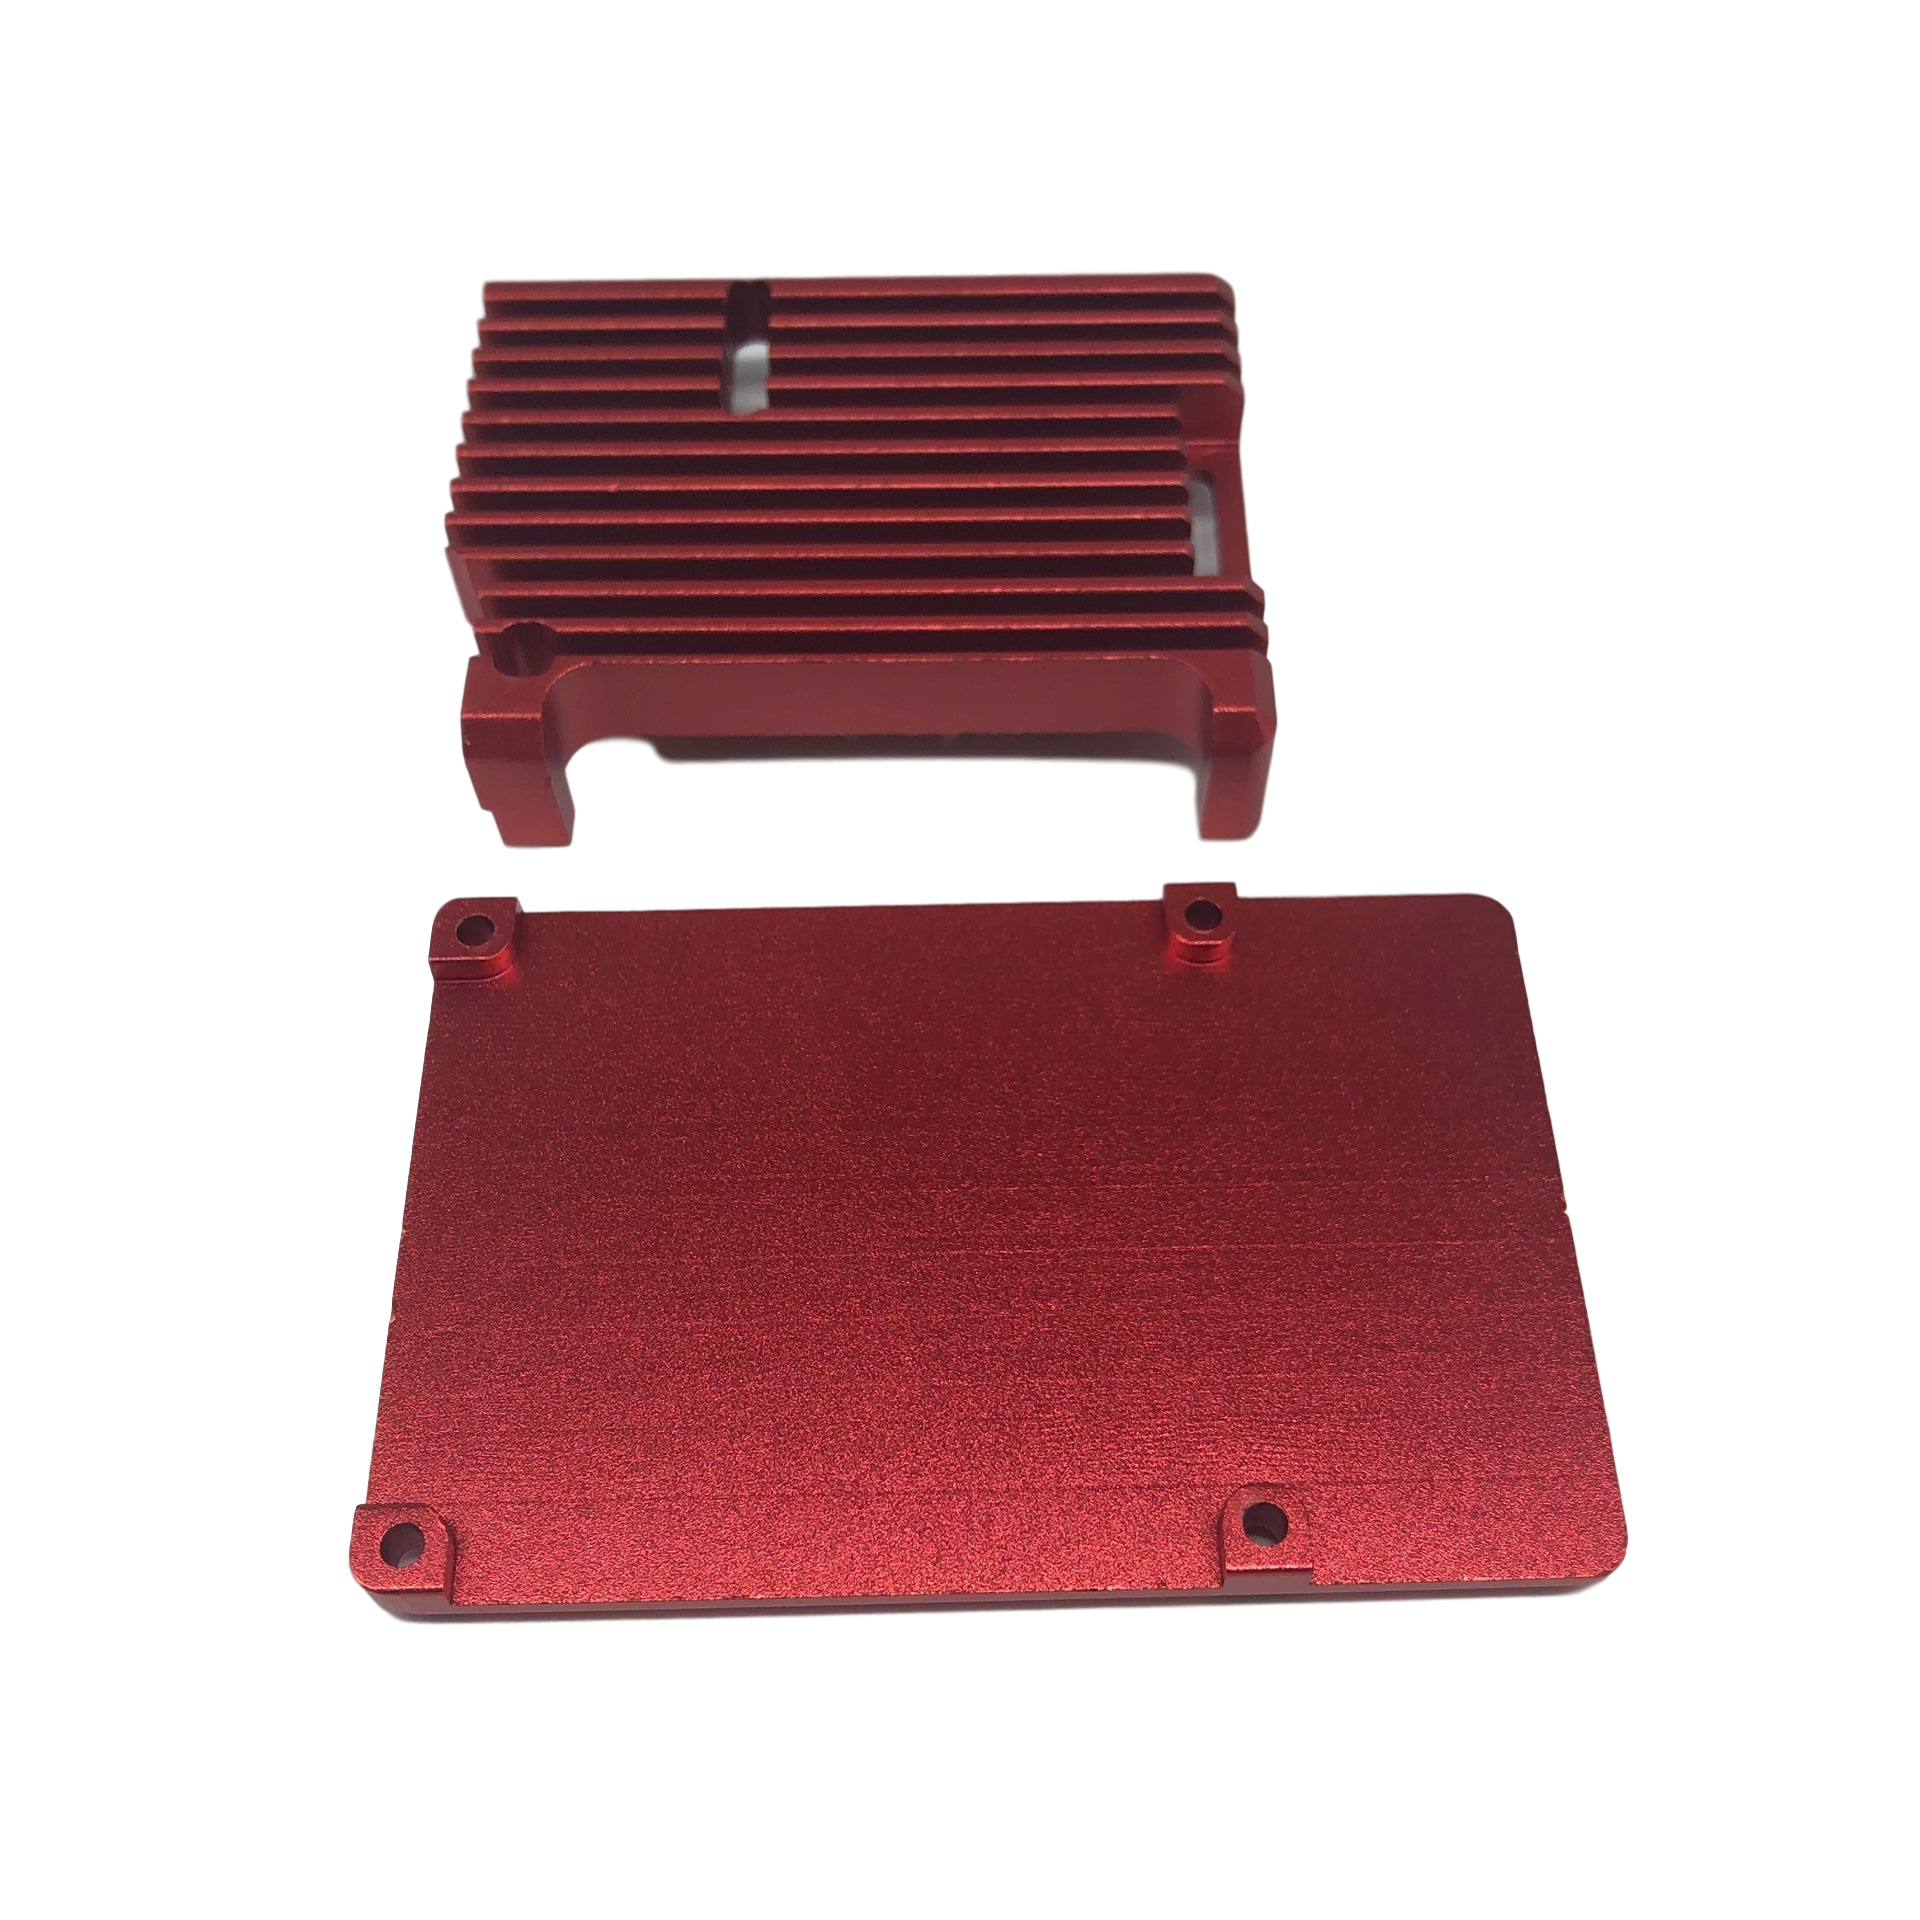 Reinforced-Aluminum-Alloy-Protective-Case-Armor-Cover-Heat-Dissipation-for-Raspberry-Pi-4B-1738903